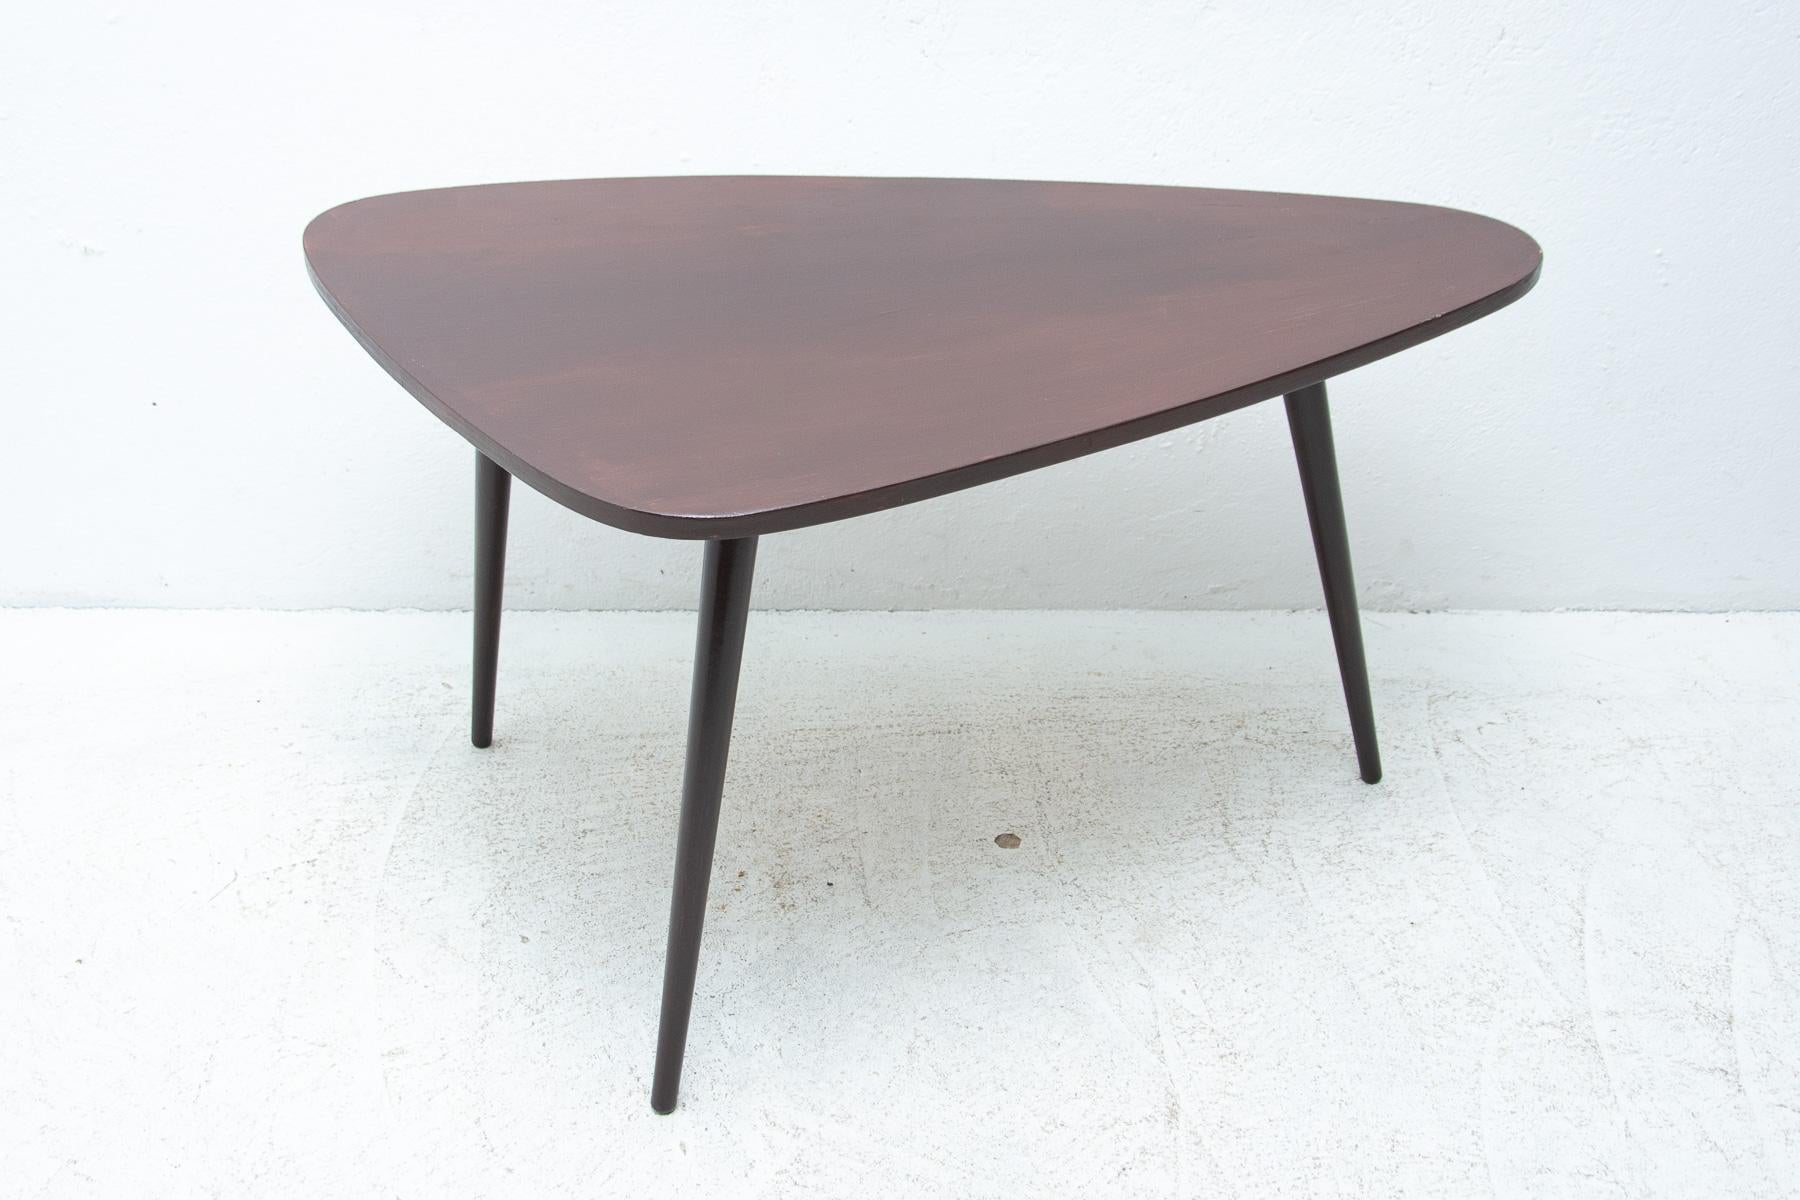 Mid century kidney table, made of stained beech wood, associated with world-renowned exhibition EXPO 58 in Brussels. In good vintage condition, showing signs of age and using.

Measures: Height 59 cm

Length 106 cm

width 65 cm.